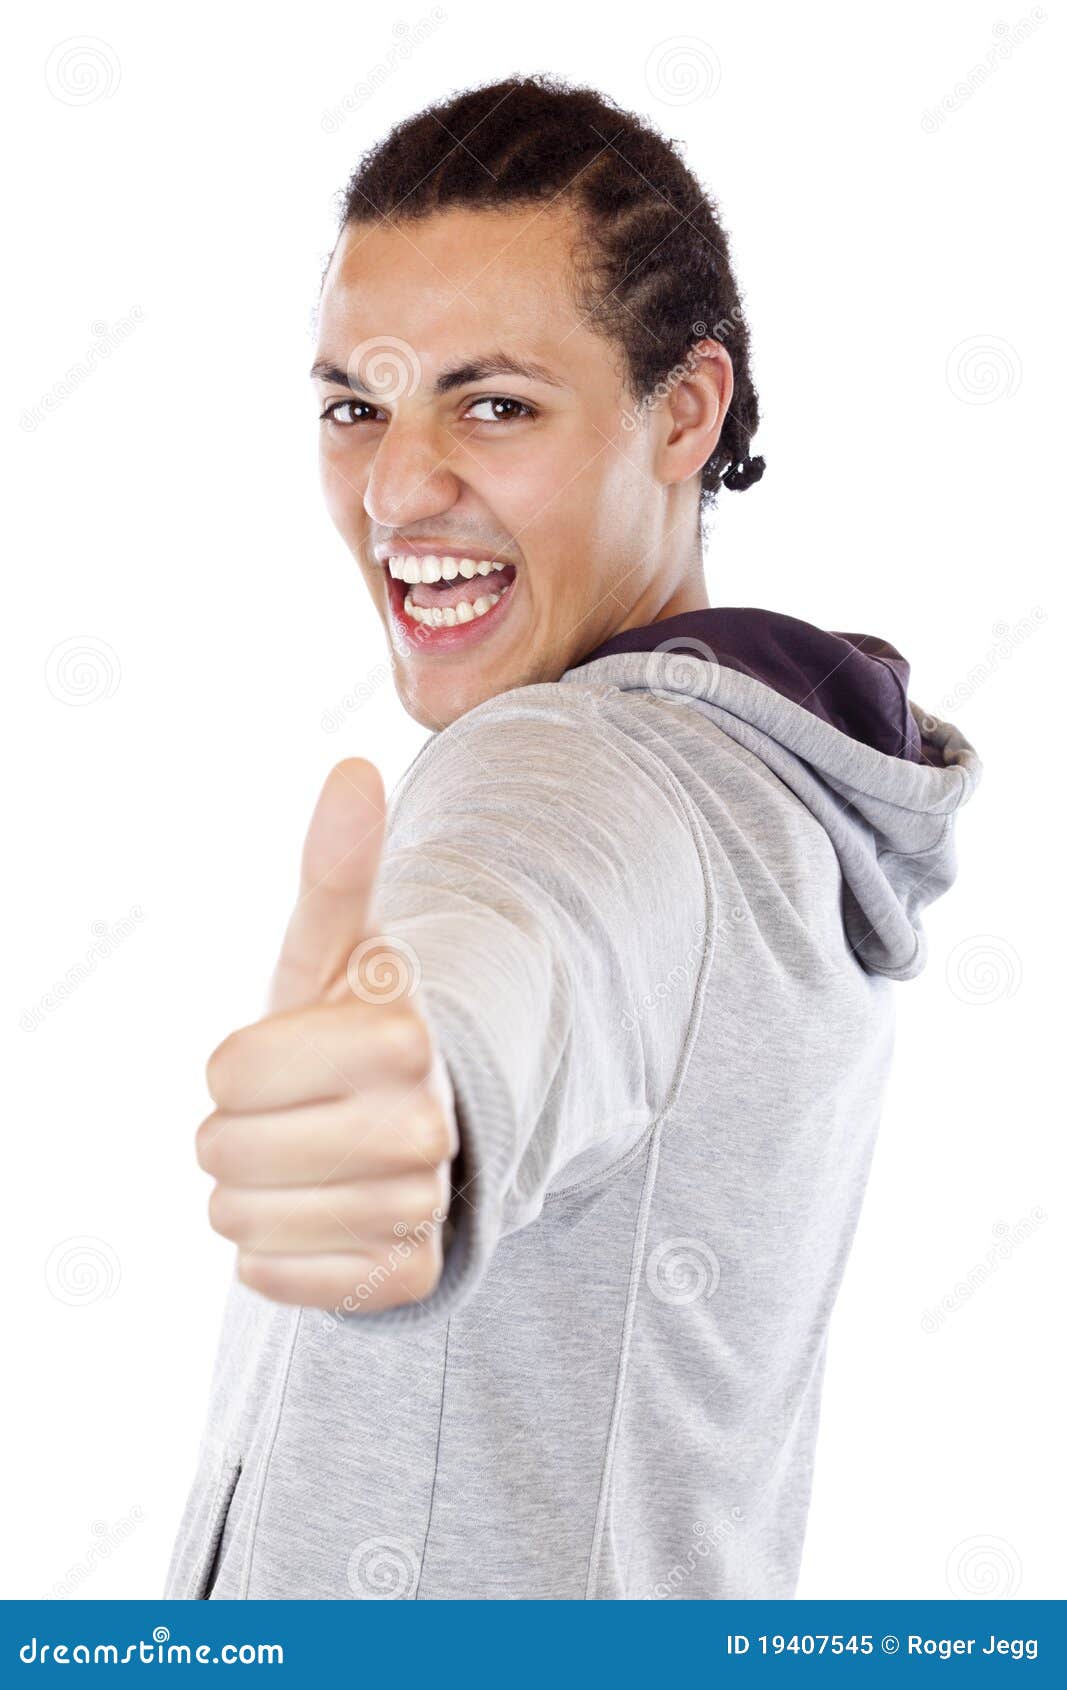 enthusiastic teenager holds thumb up